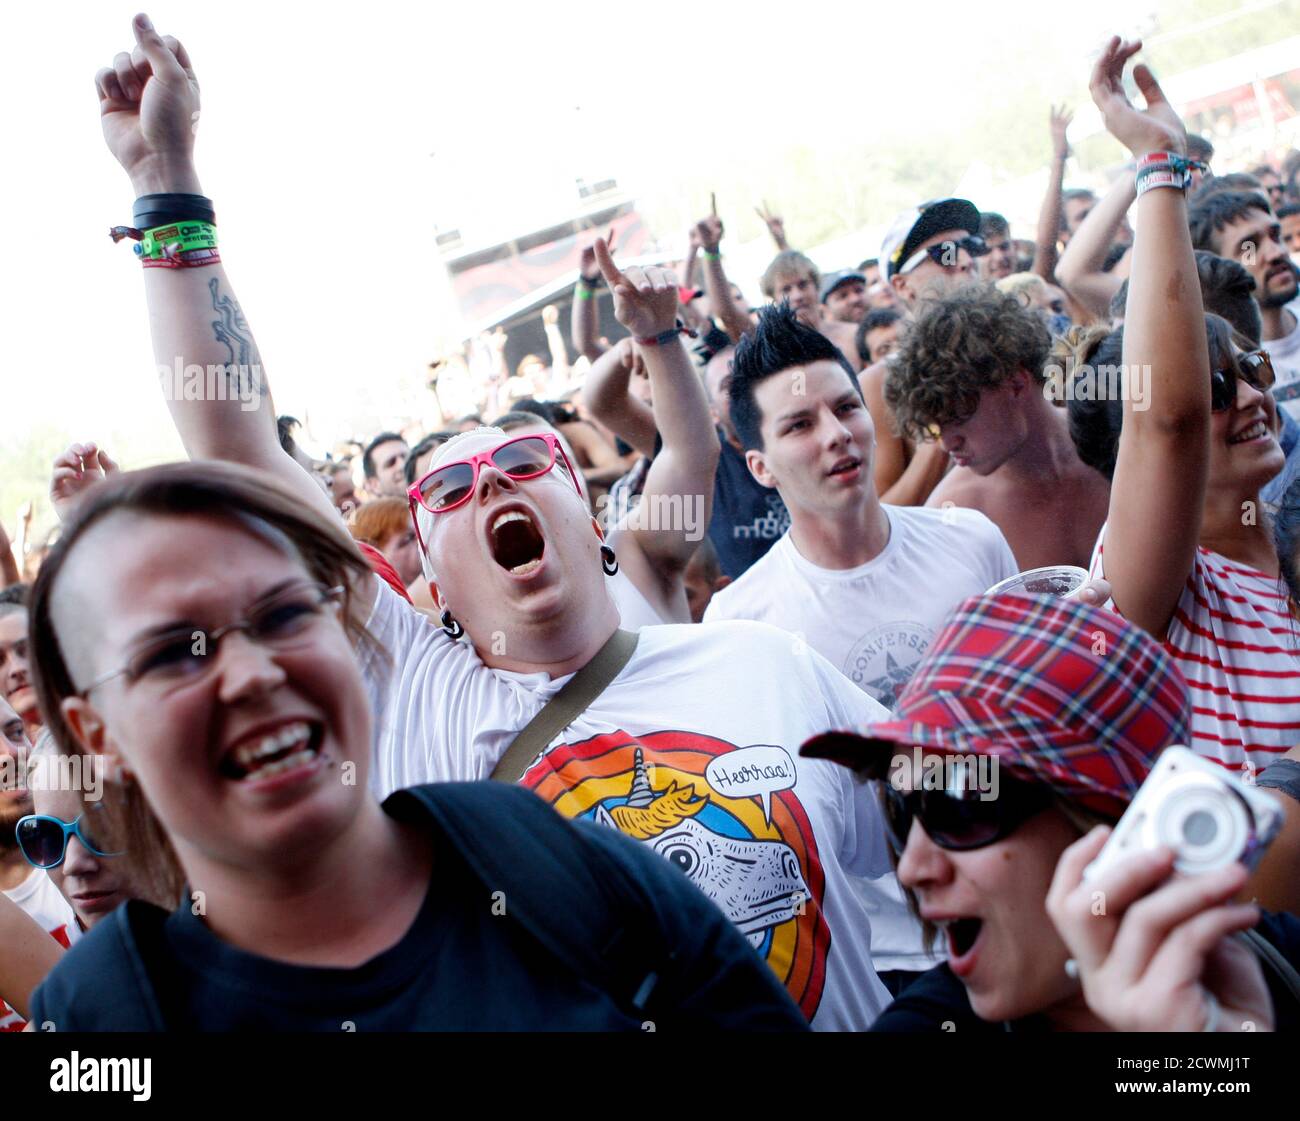 Festival goers attend a concert by Anti-Flag of America during Budapest's Sziget music festival on an island in the Danube River August 9, 2012. Sziget, one of Europe's largest cultural events, holds its 20th edition in August after being voted the best large festival in Europe at the European Festival Awards this year. Picture taken August 9, 2012. REUTERS/Bernadett Szabo (HUNGARY - Tags: ENTERTAINMENT SOCIETY) Stock Photo